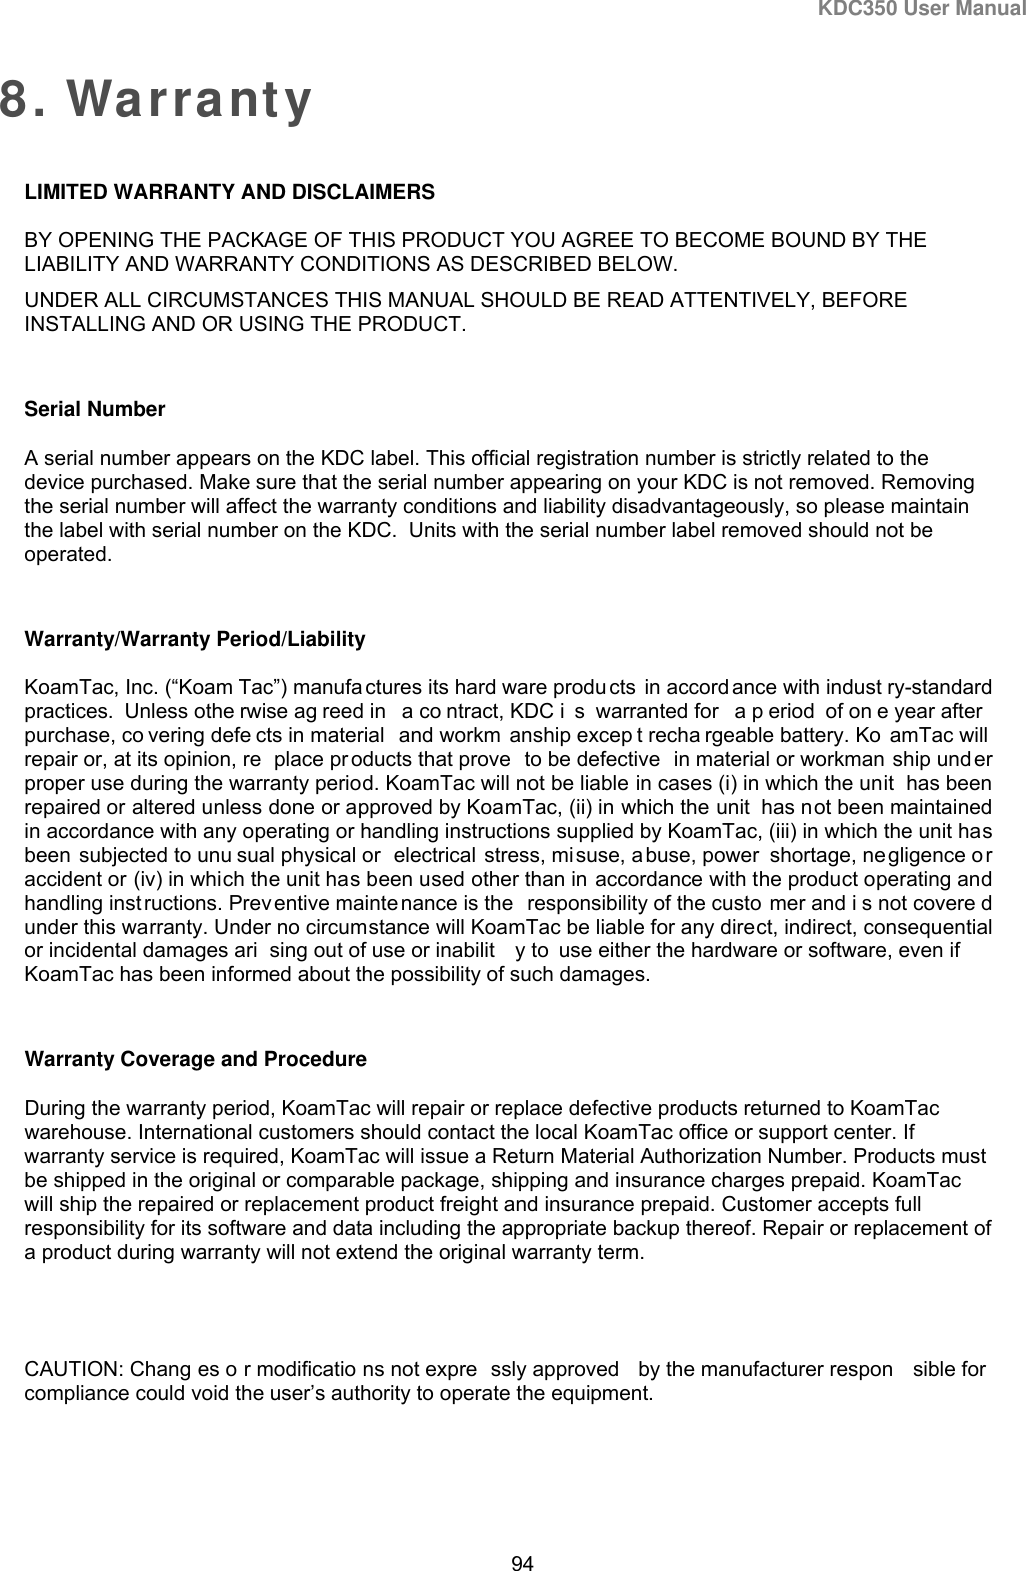 KDC350 User Manual  94  8. Warranty LIMITED WARRANTY AND DISCLAIMERS BY OPENING THE PACKAGE OF THIS PRODUCT YOU AGREE TO BECOME BOUND BY THE LIABILITY AND WARRANTY CONDITIONS AS DESCRIBED BELOW. UNDER ALL CIRCUMSTANCES THIS MANUAL SHOULD BE READ ATTENTIVELY, BEFORE INSTALLING AND OR USING THE PRODUCT.  Serial Number A serial number appears on the KDC label. This official registration number is strictly related to the device purchased. Make sure that the serial number appearing on your KDC is not removed. Removing the serial number will affect the warranty conditions and liability disadvantageously, so please maintain the label with serial number on the KDC.  Units with the serial number label removed should not be operated.  Warranty/Warranty Period/Liability KoamTac, Inc. (“Koam Tac”) manufa ctures its hard ware produ cts in accord ance with indust ry-standard practices. Unless othe rwise ag reed in  a co ntract, KDC i s warranted for  a p eriod of on e year after purchase, co vering defe cts in material  and workm anship excep t recha rgeable battery. Ko amTac will repair or, at its opinion, re place pr oducts that prove  to be defective  in material or workman ship under proper use during the warranty period. KoamTac will not be liable in cases (i) in which the unit  has been repaired or altered unless done or approved by KoamTac, (ii) in which the unit  has not been maintained in accordance with any operating or handling instructions supplied by KoamTac, (iii) in which the unit has been subjected to unu sual physical or  electrical stress, misuse, abuse, power shortage, negligence or accident or (iv) in which the unit has been used other than in accordance with the product operating and handling instructions. Prev entive mainte nance is the  responsibility of the custo mer and i s not covere d under this warranty. Under no circumstance will KoamTac be liable for any direct, indirect, consequential or incidental damages ari sing out of use or inabilit y to  use either the hardware or software, even if KoamTac has been informed about the possibility of such damages.  Warranty Coverage and Procedure During the warranty period, KoamTac will repair or replace defective products returned to KoamTac warehouse. International customers should contact the local KoamTac office or support center. If warranty service is required, KoamTac will issue a Return Material Authorization Number. Products must be shipped in the original or comparable package, shipping and insurance charges prepaid. KoamTac will ship the repaired or replacement product freight and insurance prepaid. Customer accepts full responsibility for its software and data including the appropriate backup thereof. Repair or replacement of a product during warranty will not extend the original warranty term.    CAUTION: Chang es o r modificatio ns not expre ssly approved  by the manufacturer respon sible for compliance could void the user’s authority to operate the equipment. 